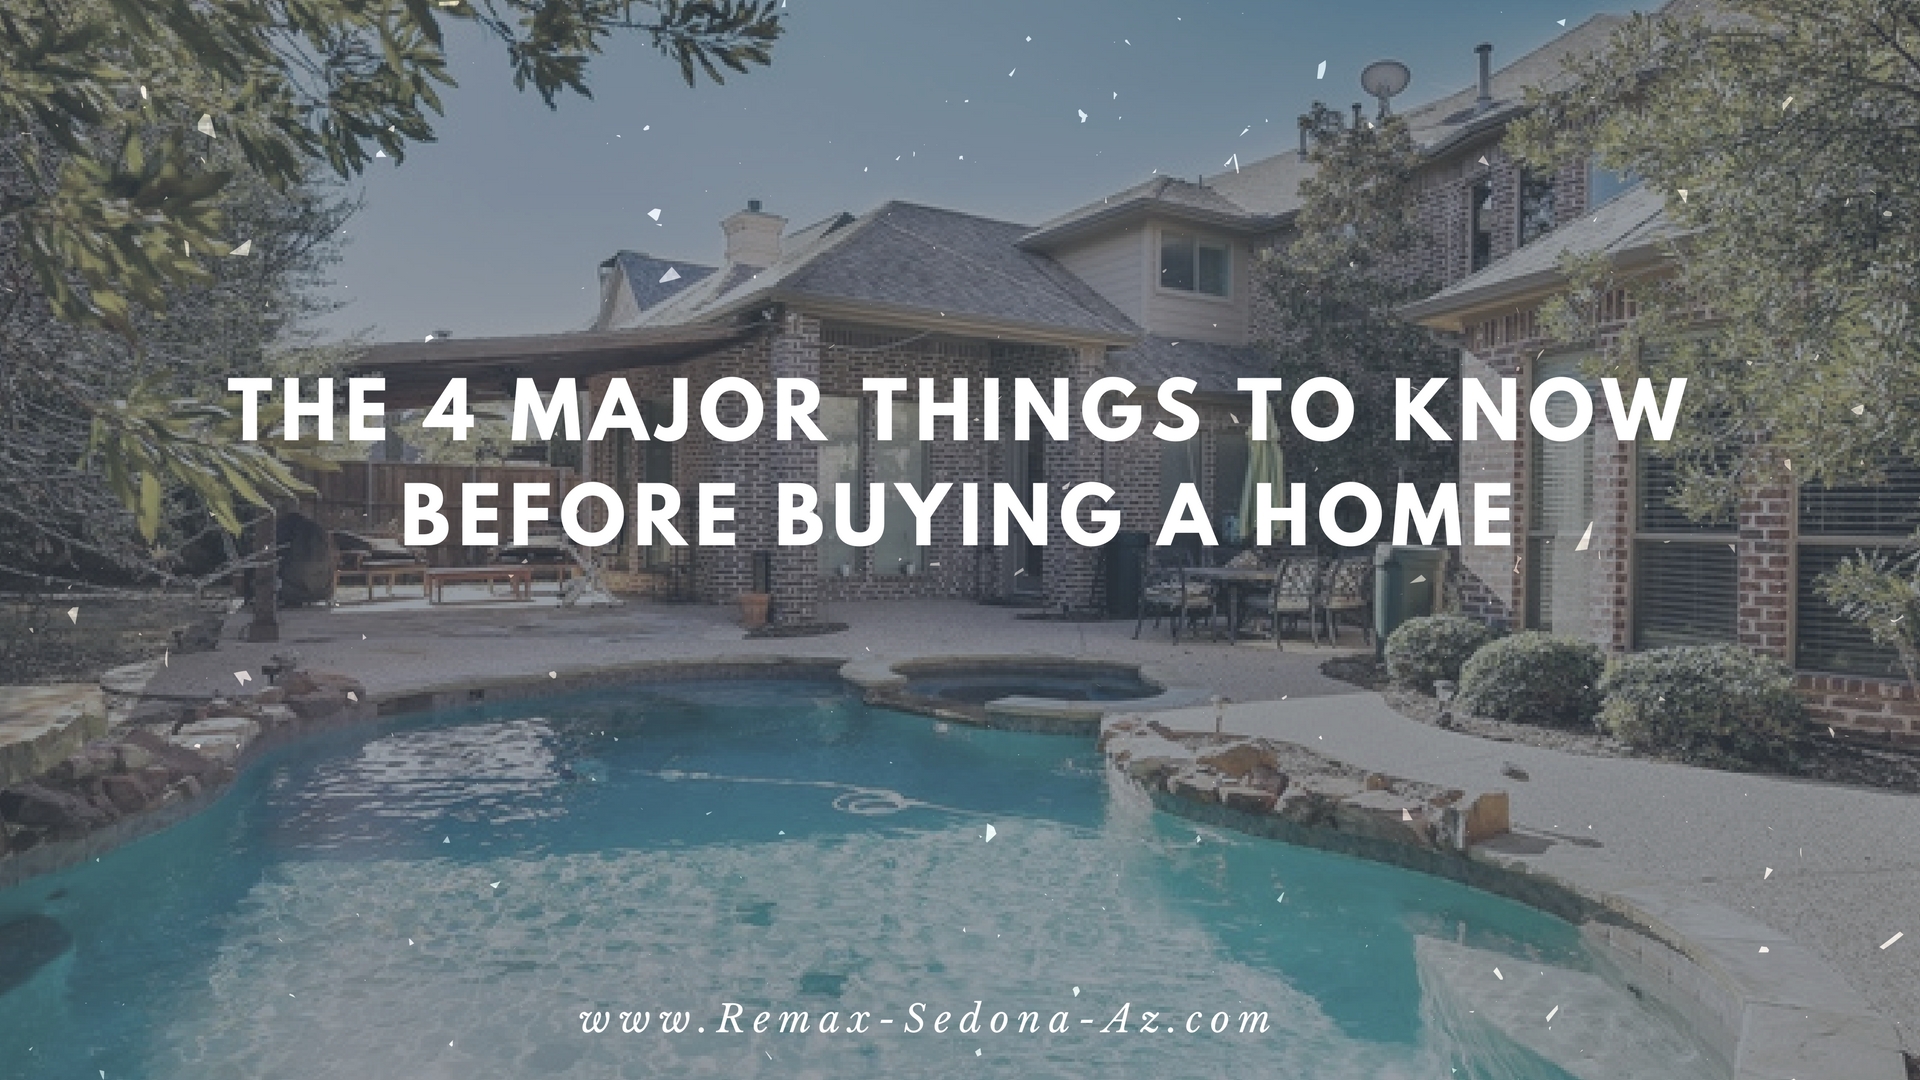 The 4 Things to KNow Before Buying a House